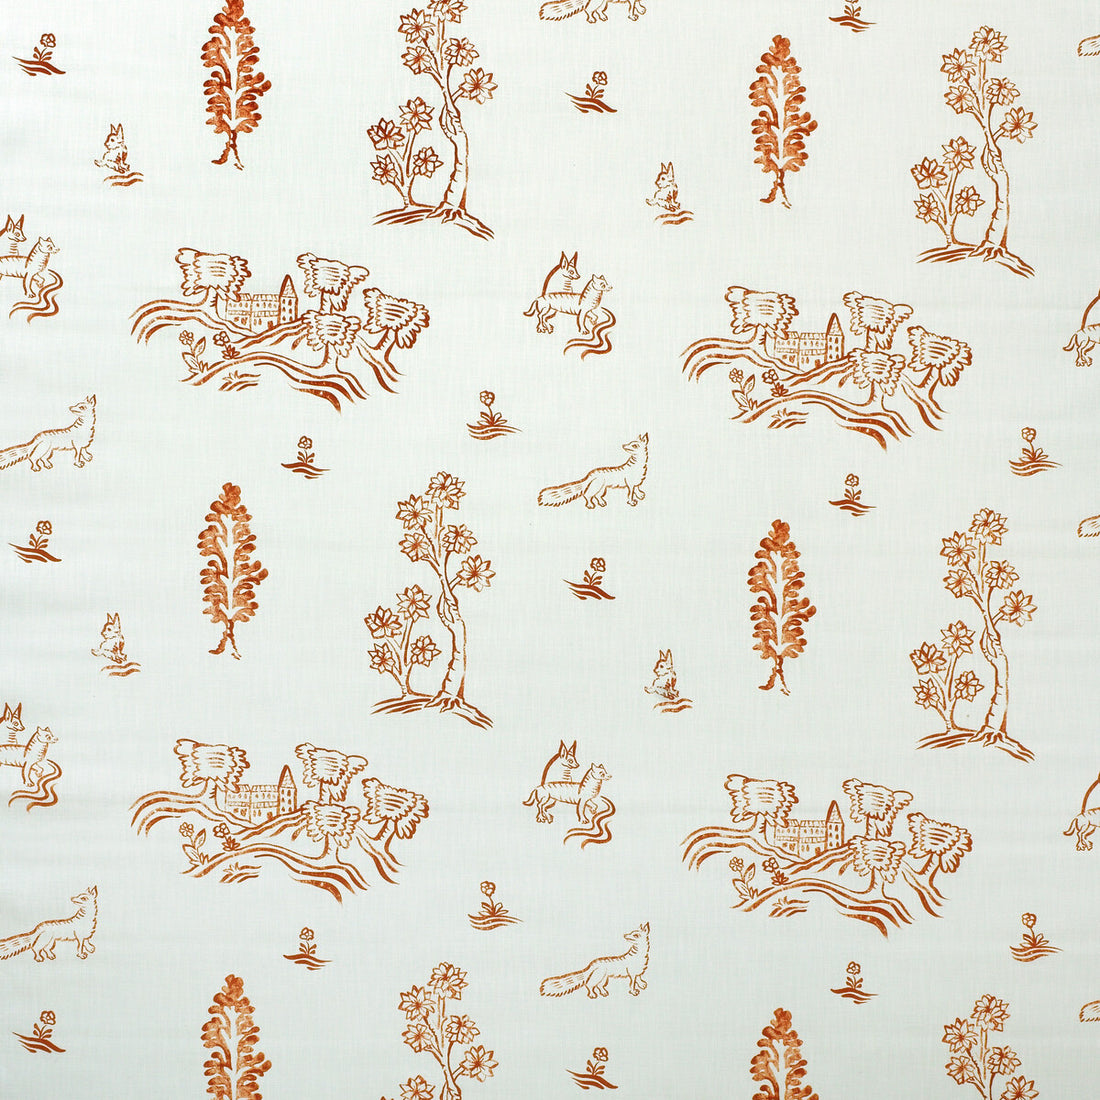 Friendly Folk Outdoor fabric in melon orange color - pattern AM100377.12.0 - by Kravet Couture in the Andrew Martin Kit Kemp Outdoor collection